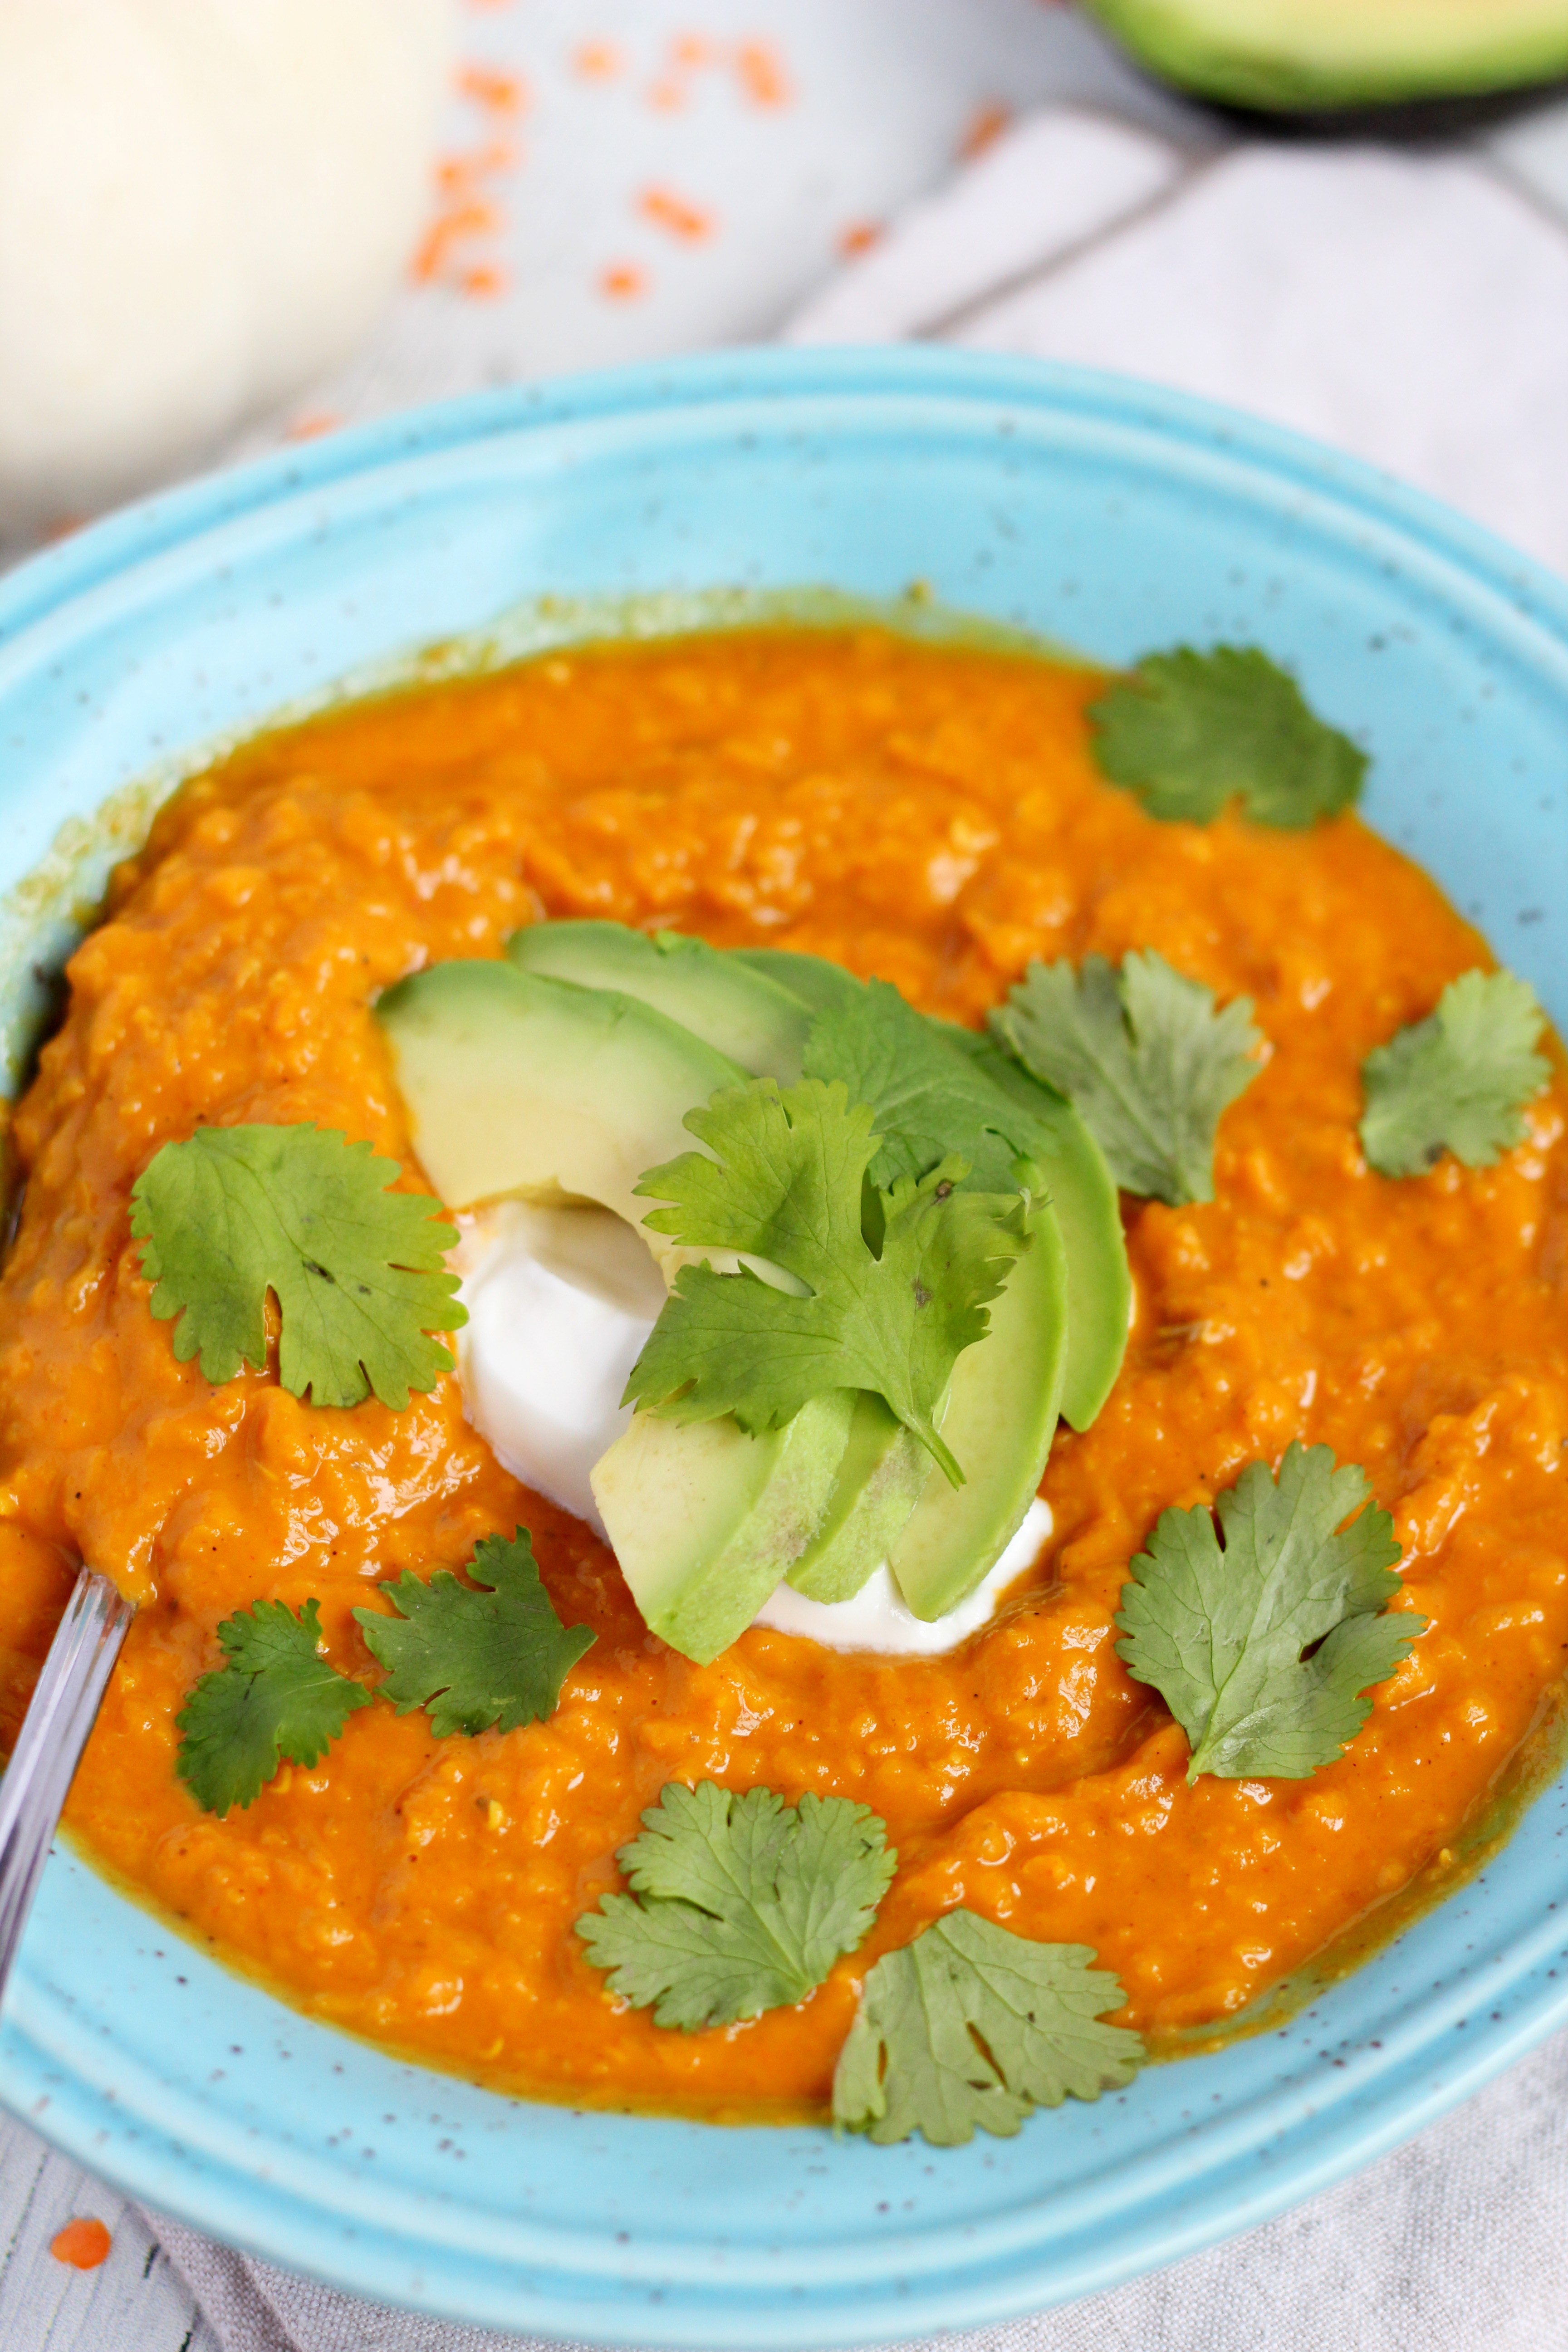 lentil sauce with avocado and sour cream in blue plate